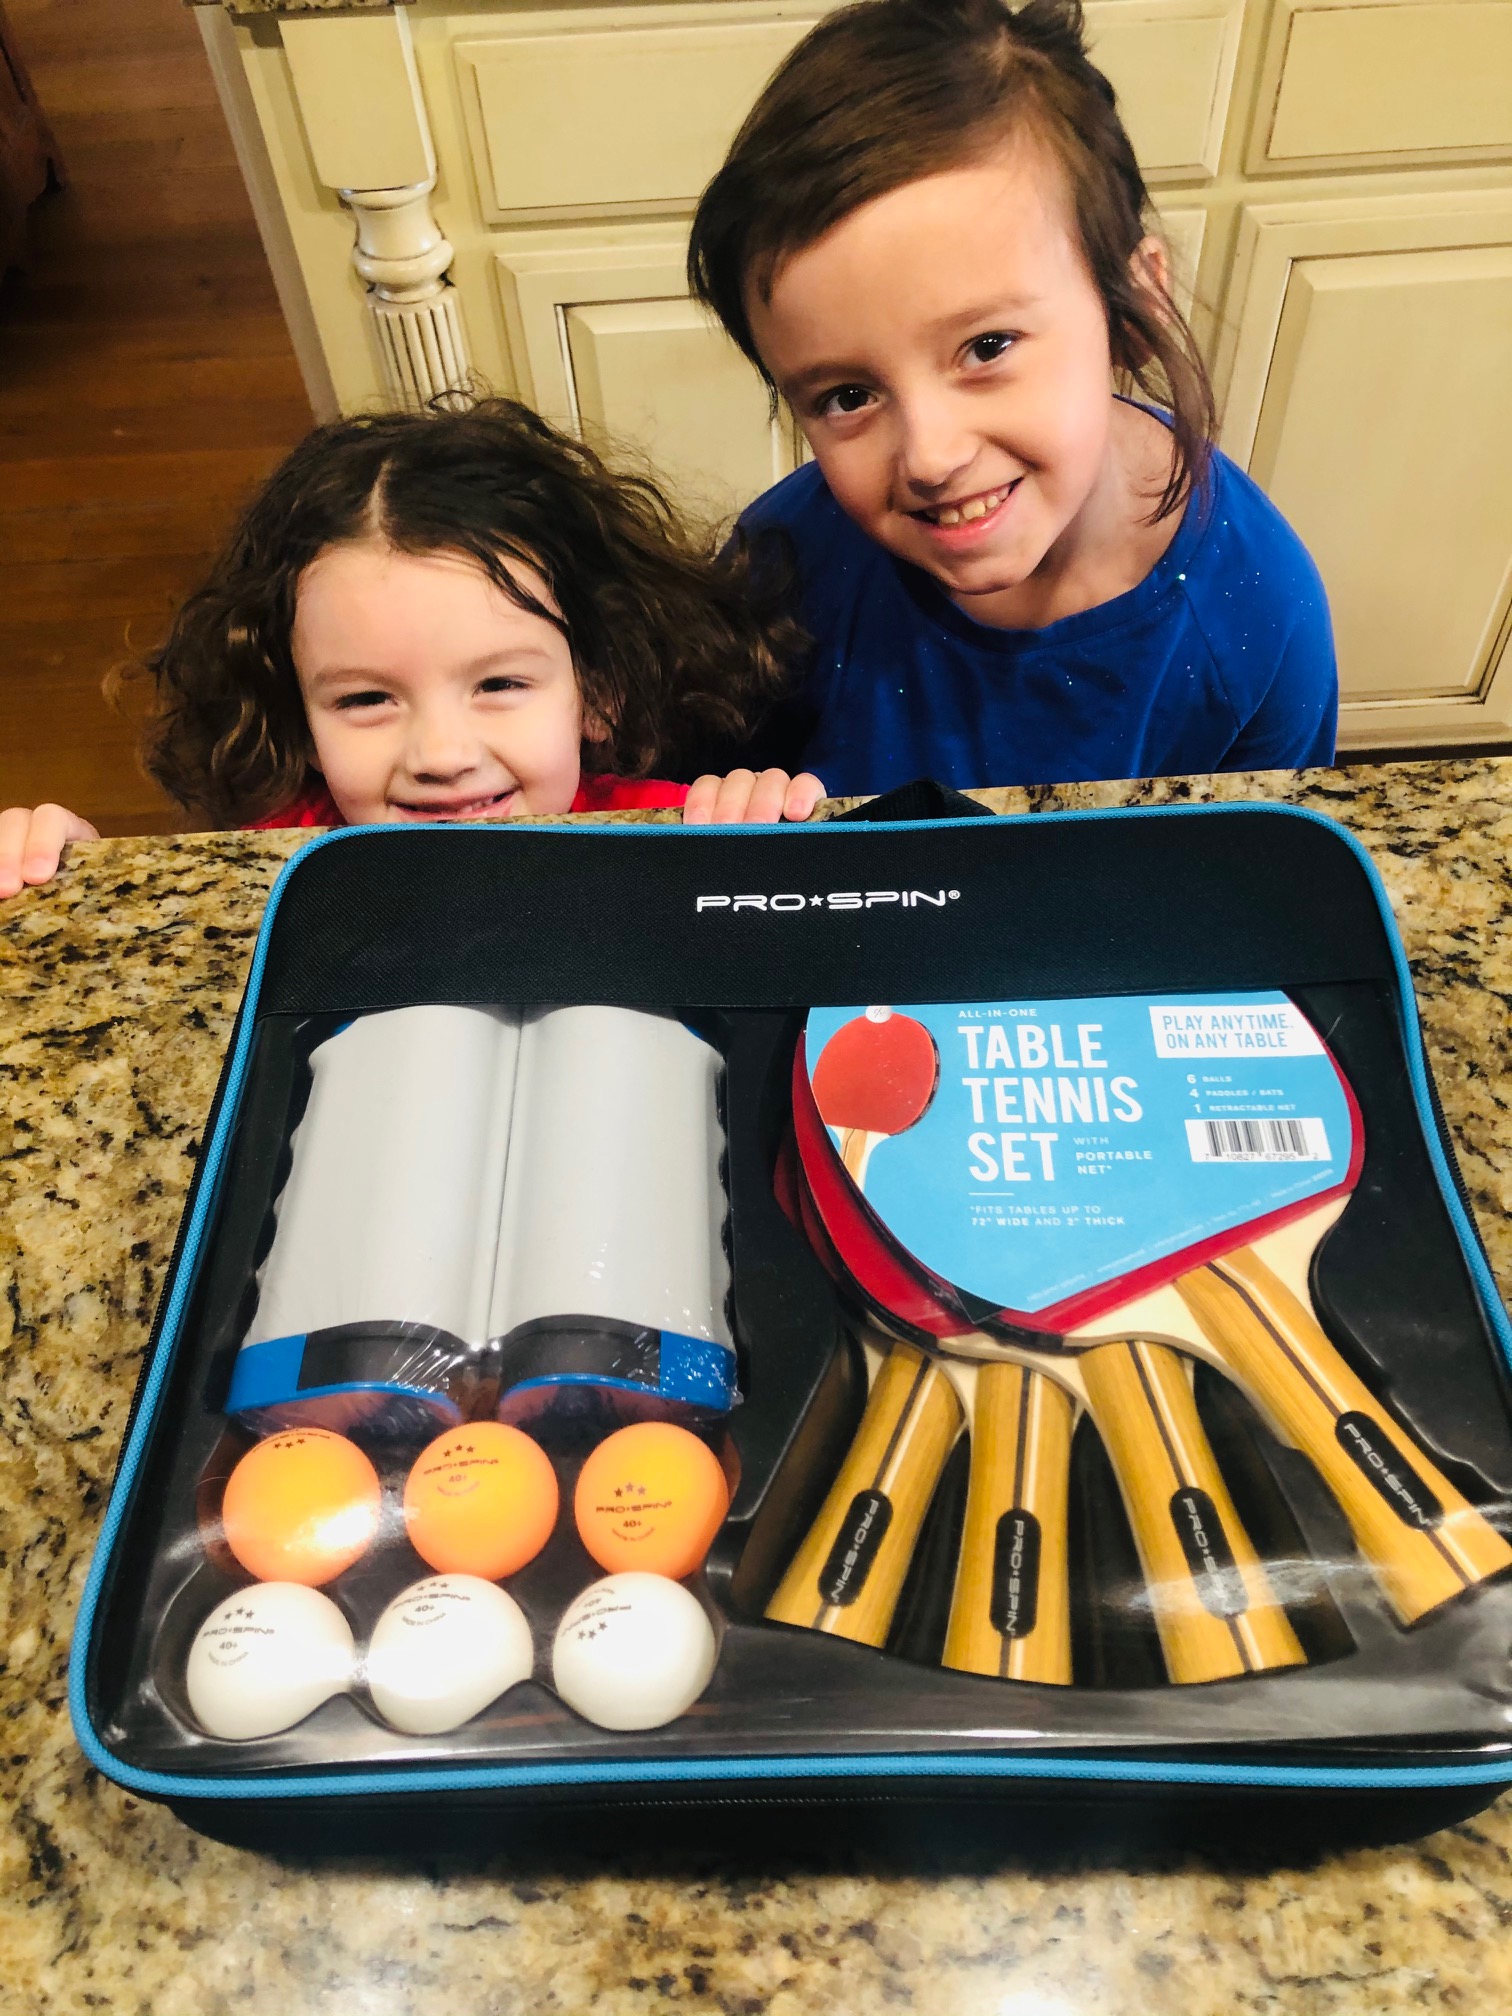 Portable Ping Pong Set Giveaway-Your Family Would Love It!